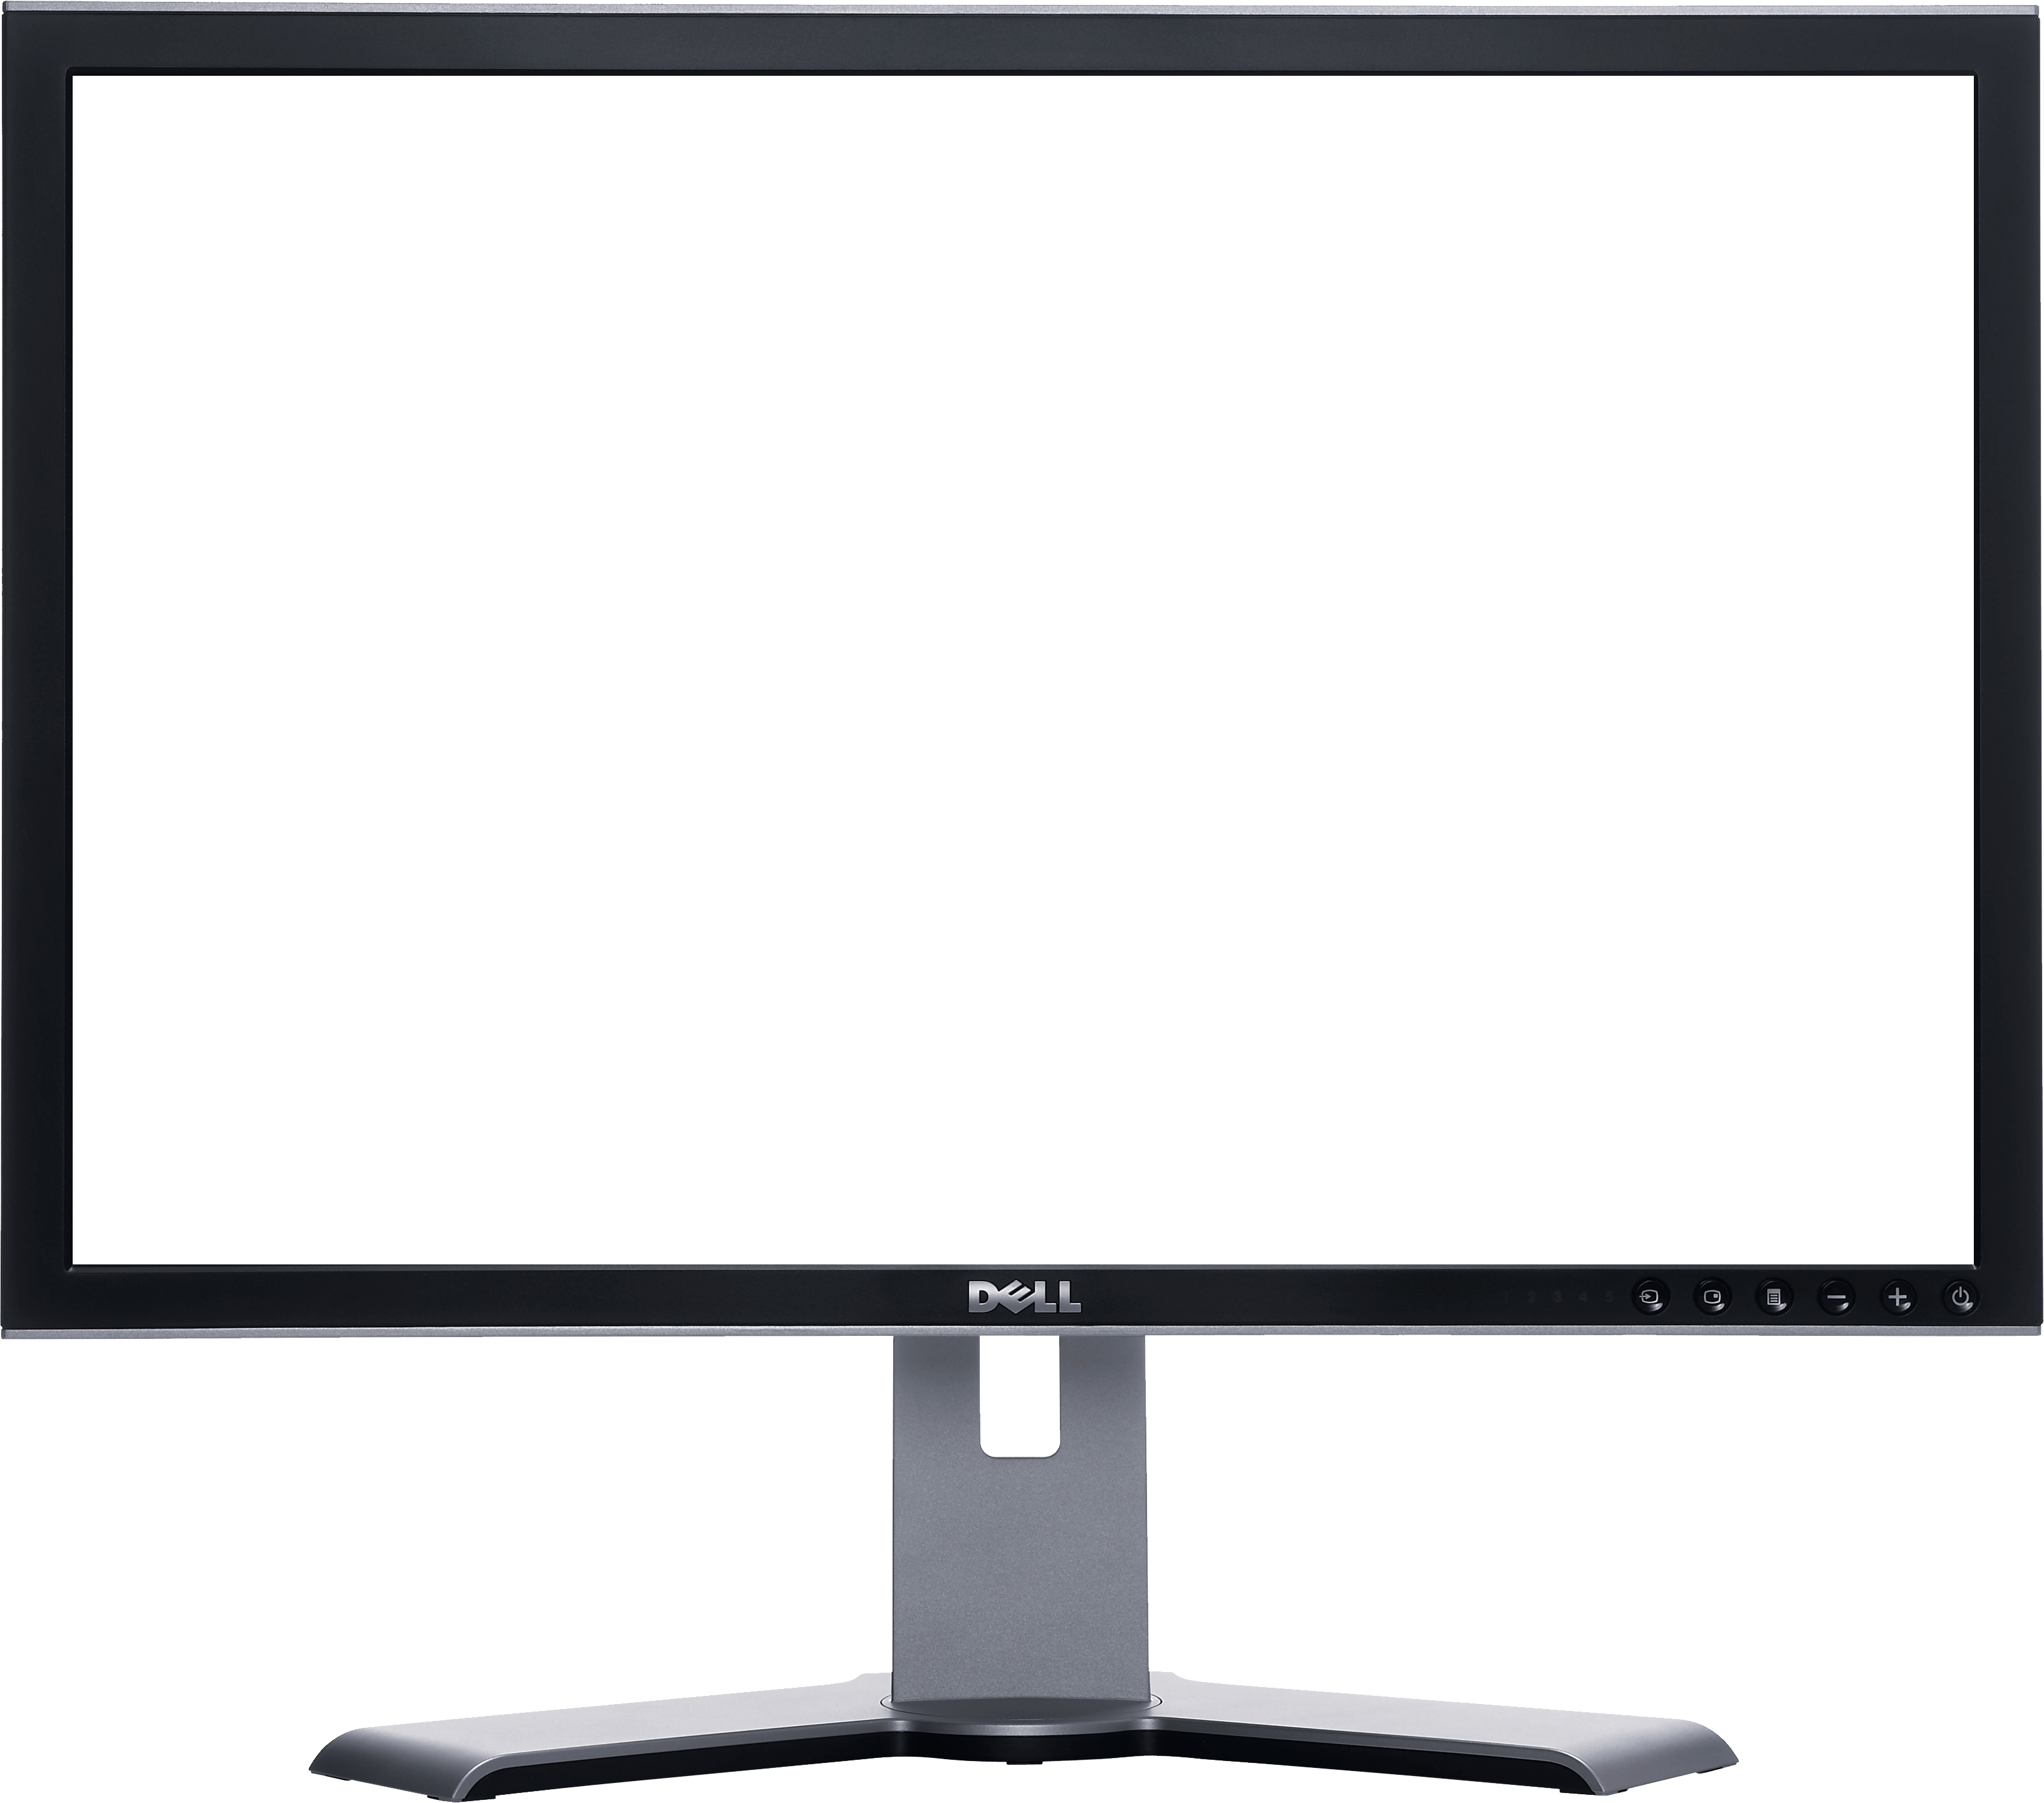 Monitor LCD Background PNG Image